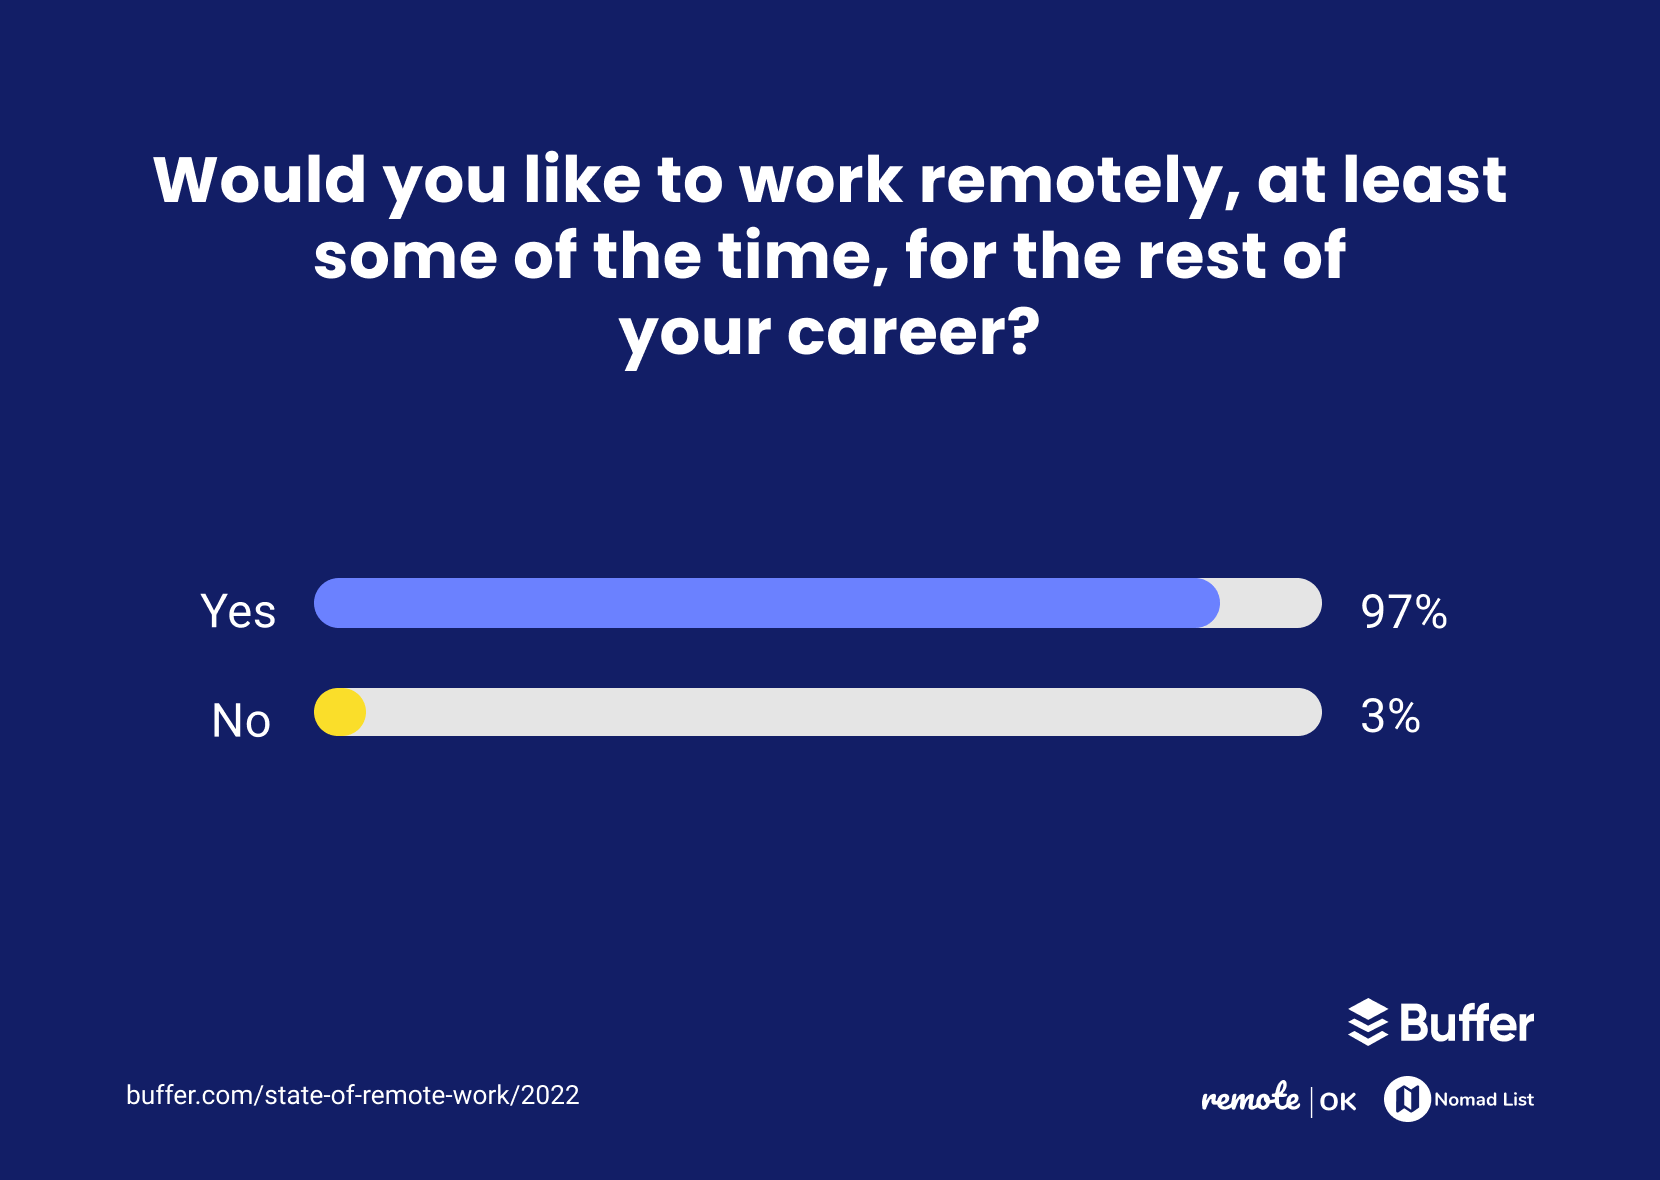 97% of people said they would like to continue working remotely, at least for some of the time